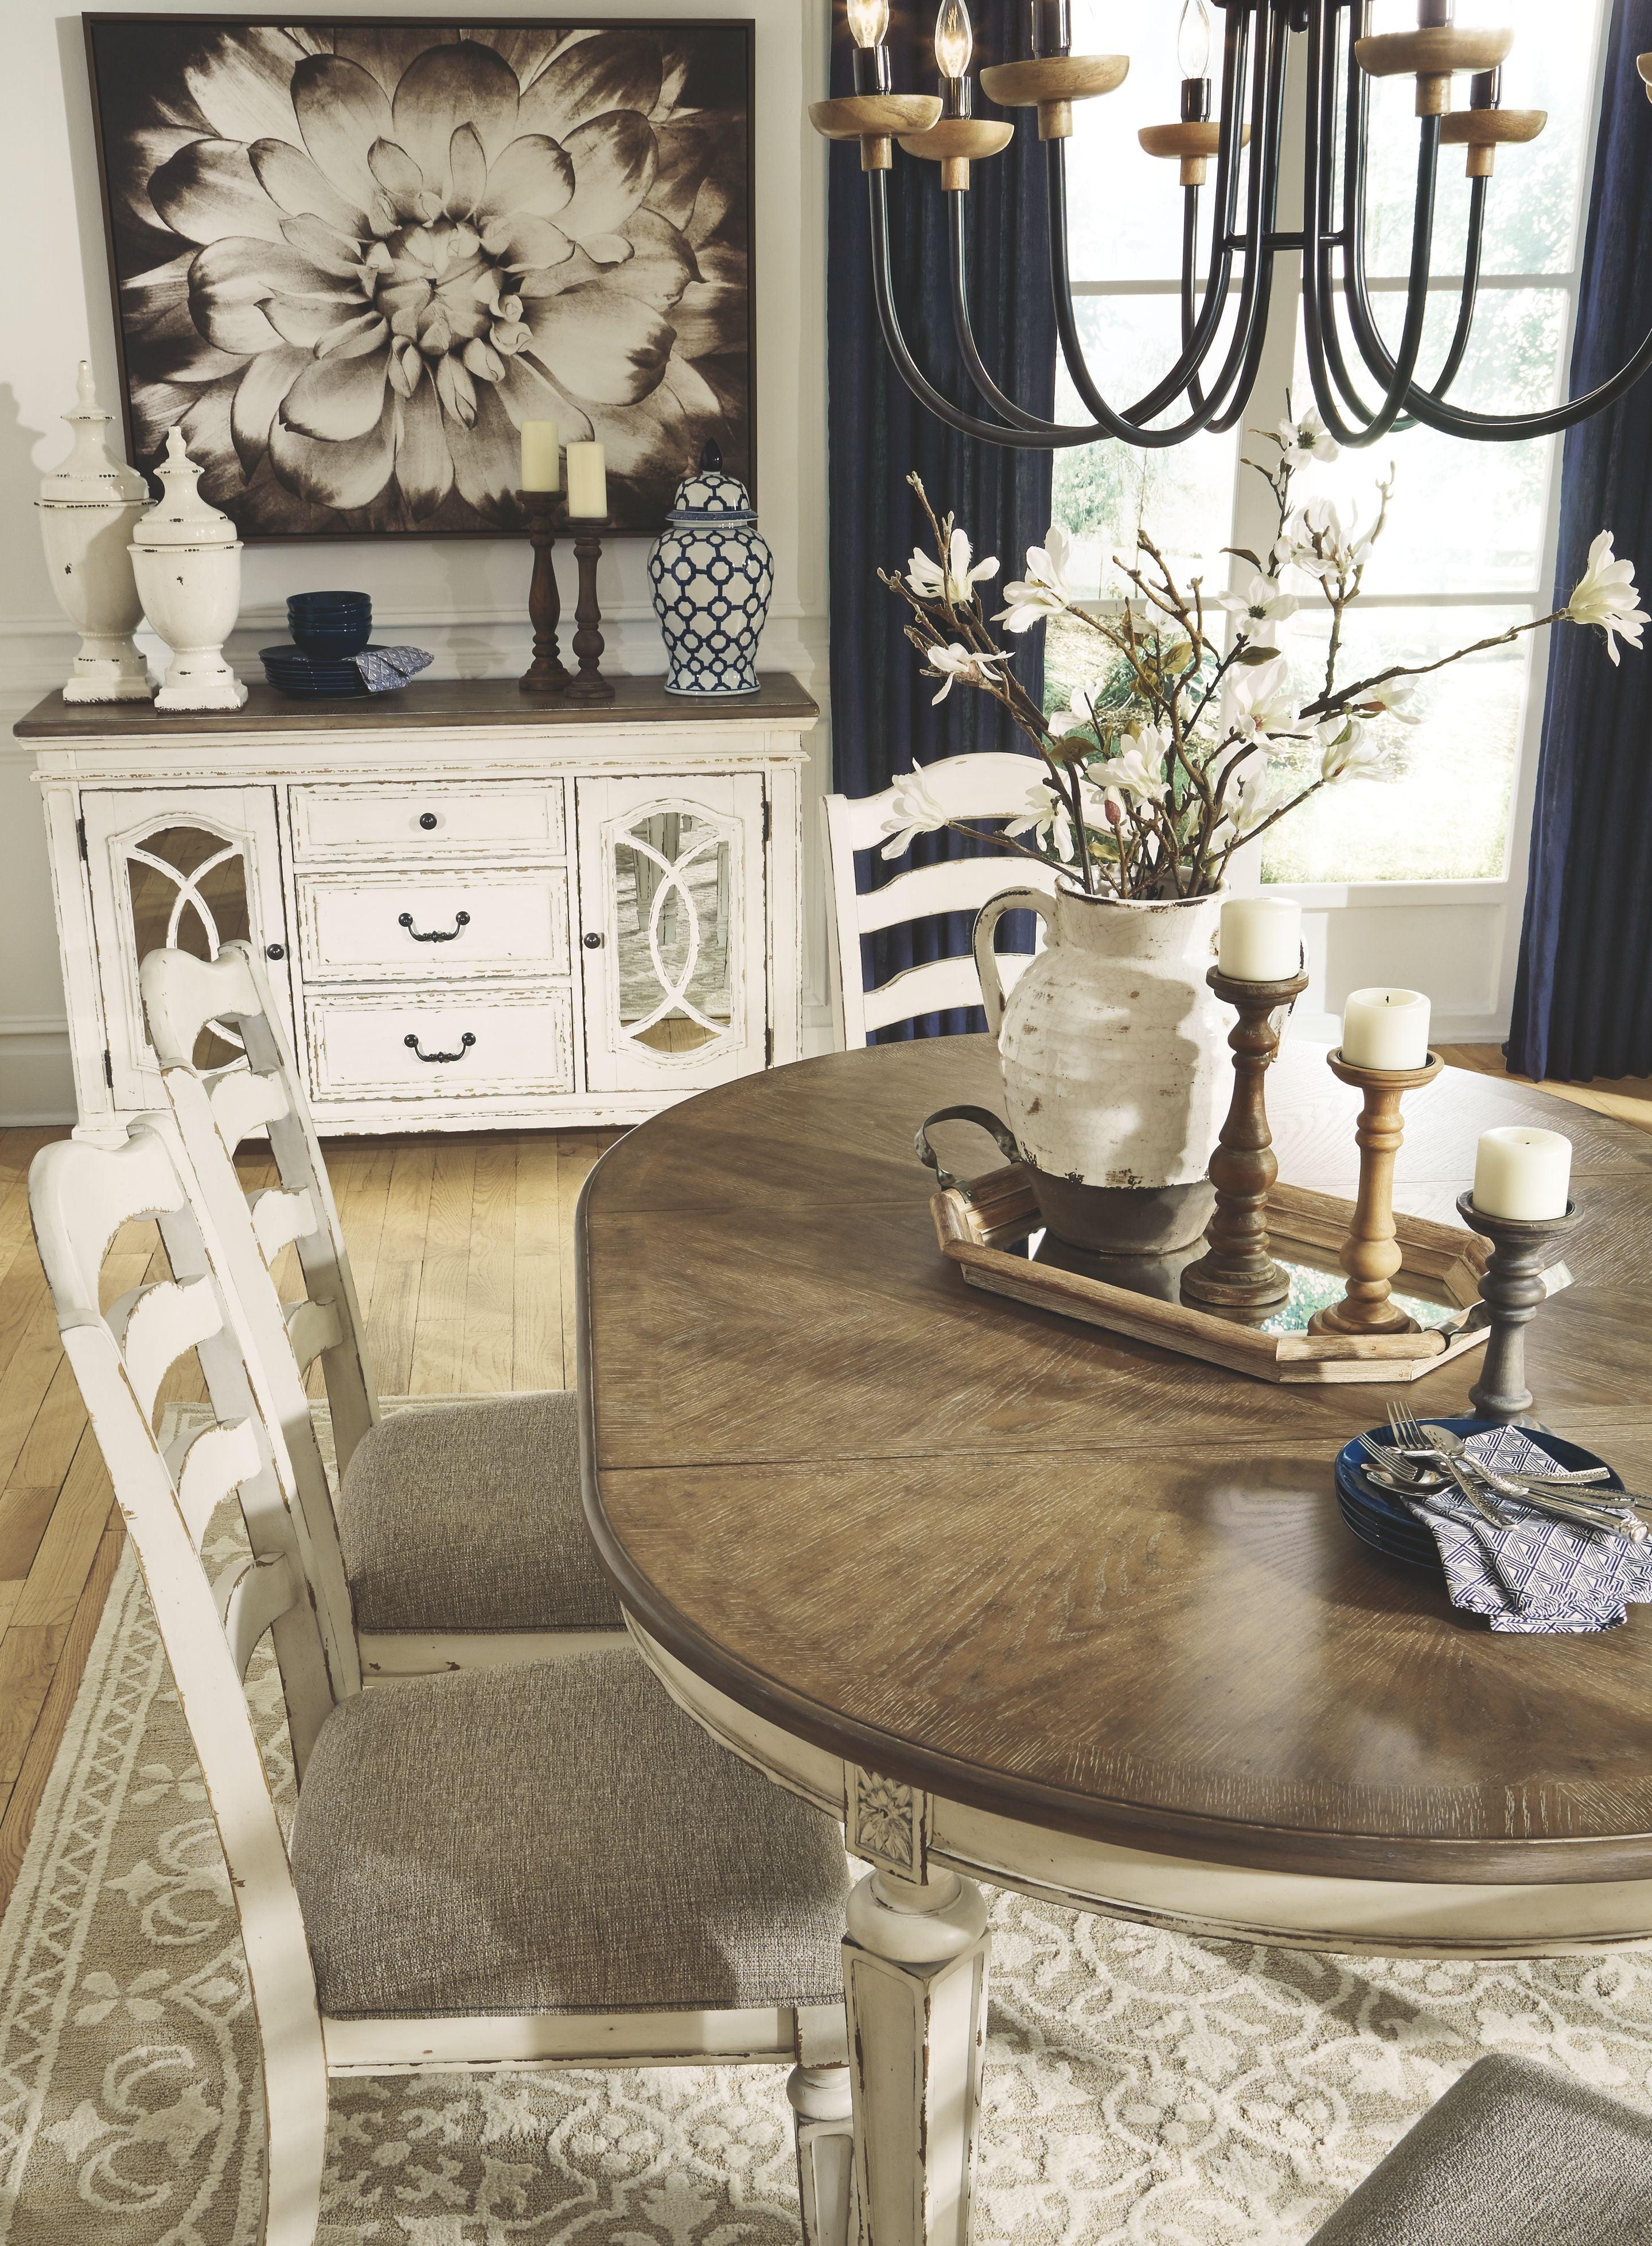 Ashley Furniture - Realyn - Chipped White - Oval Dining Room Extension Table - 5th Avenue Furniture